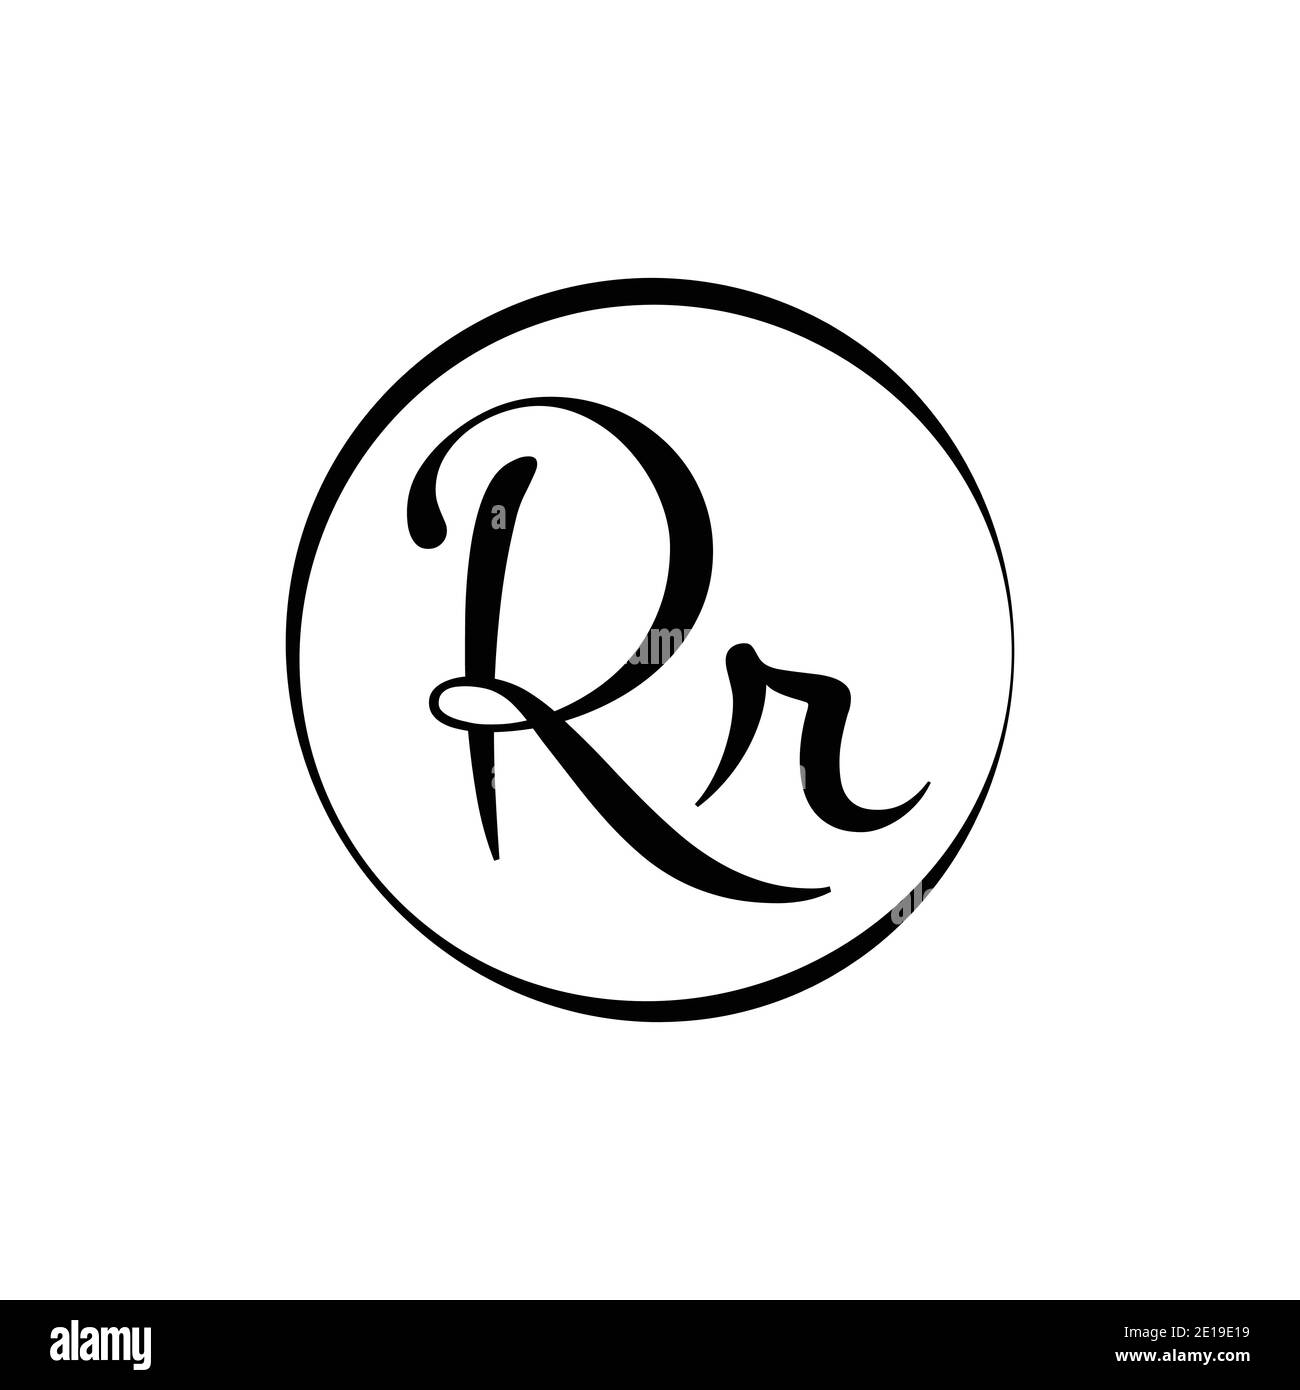 Rr logo Black and White Stock Photos & Images - Alamy